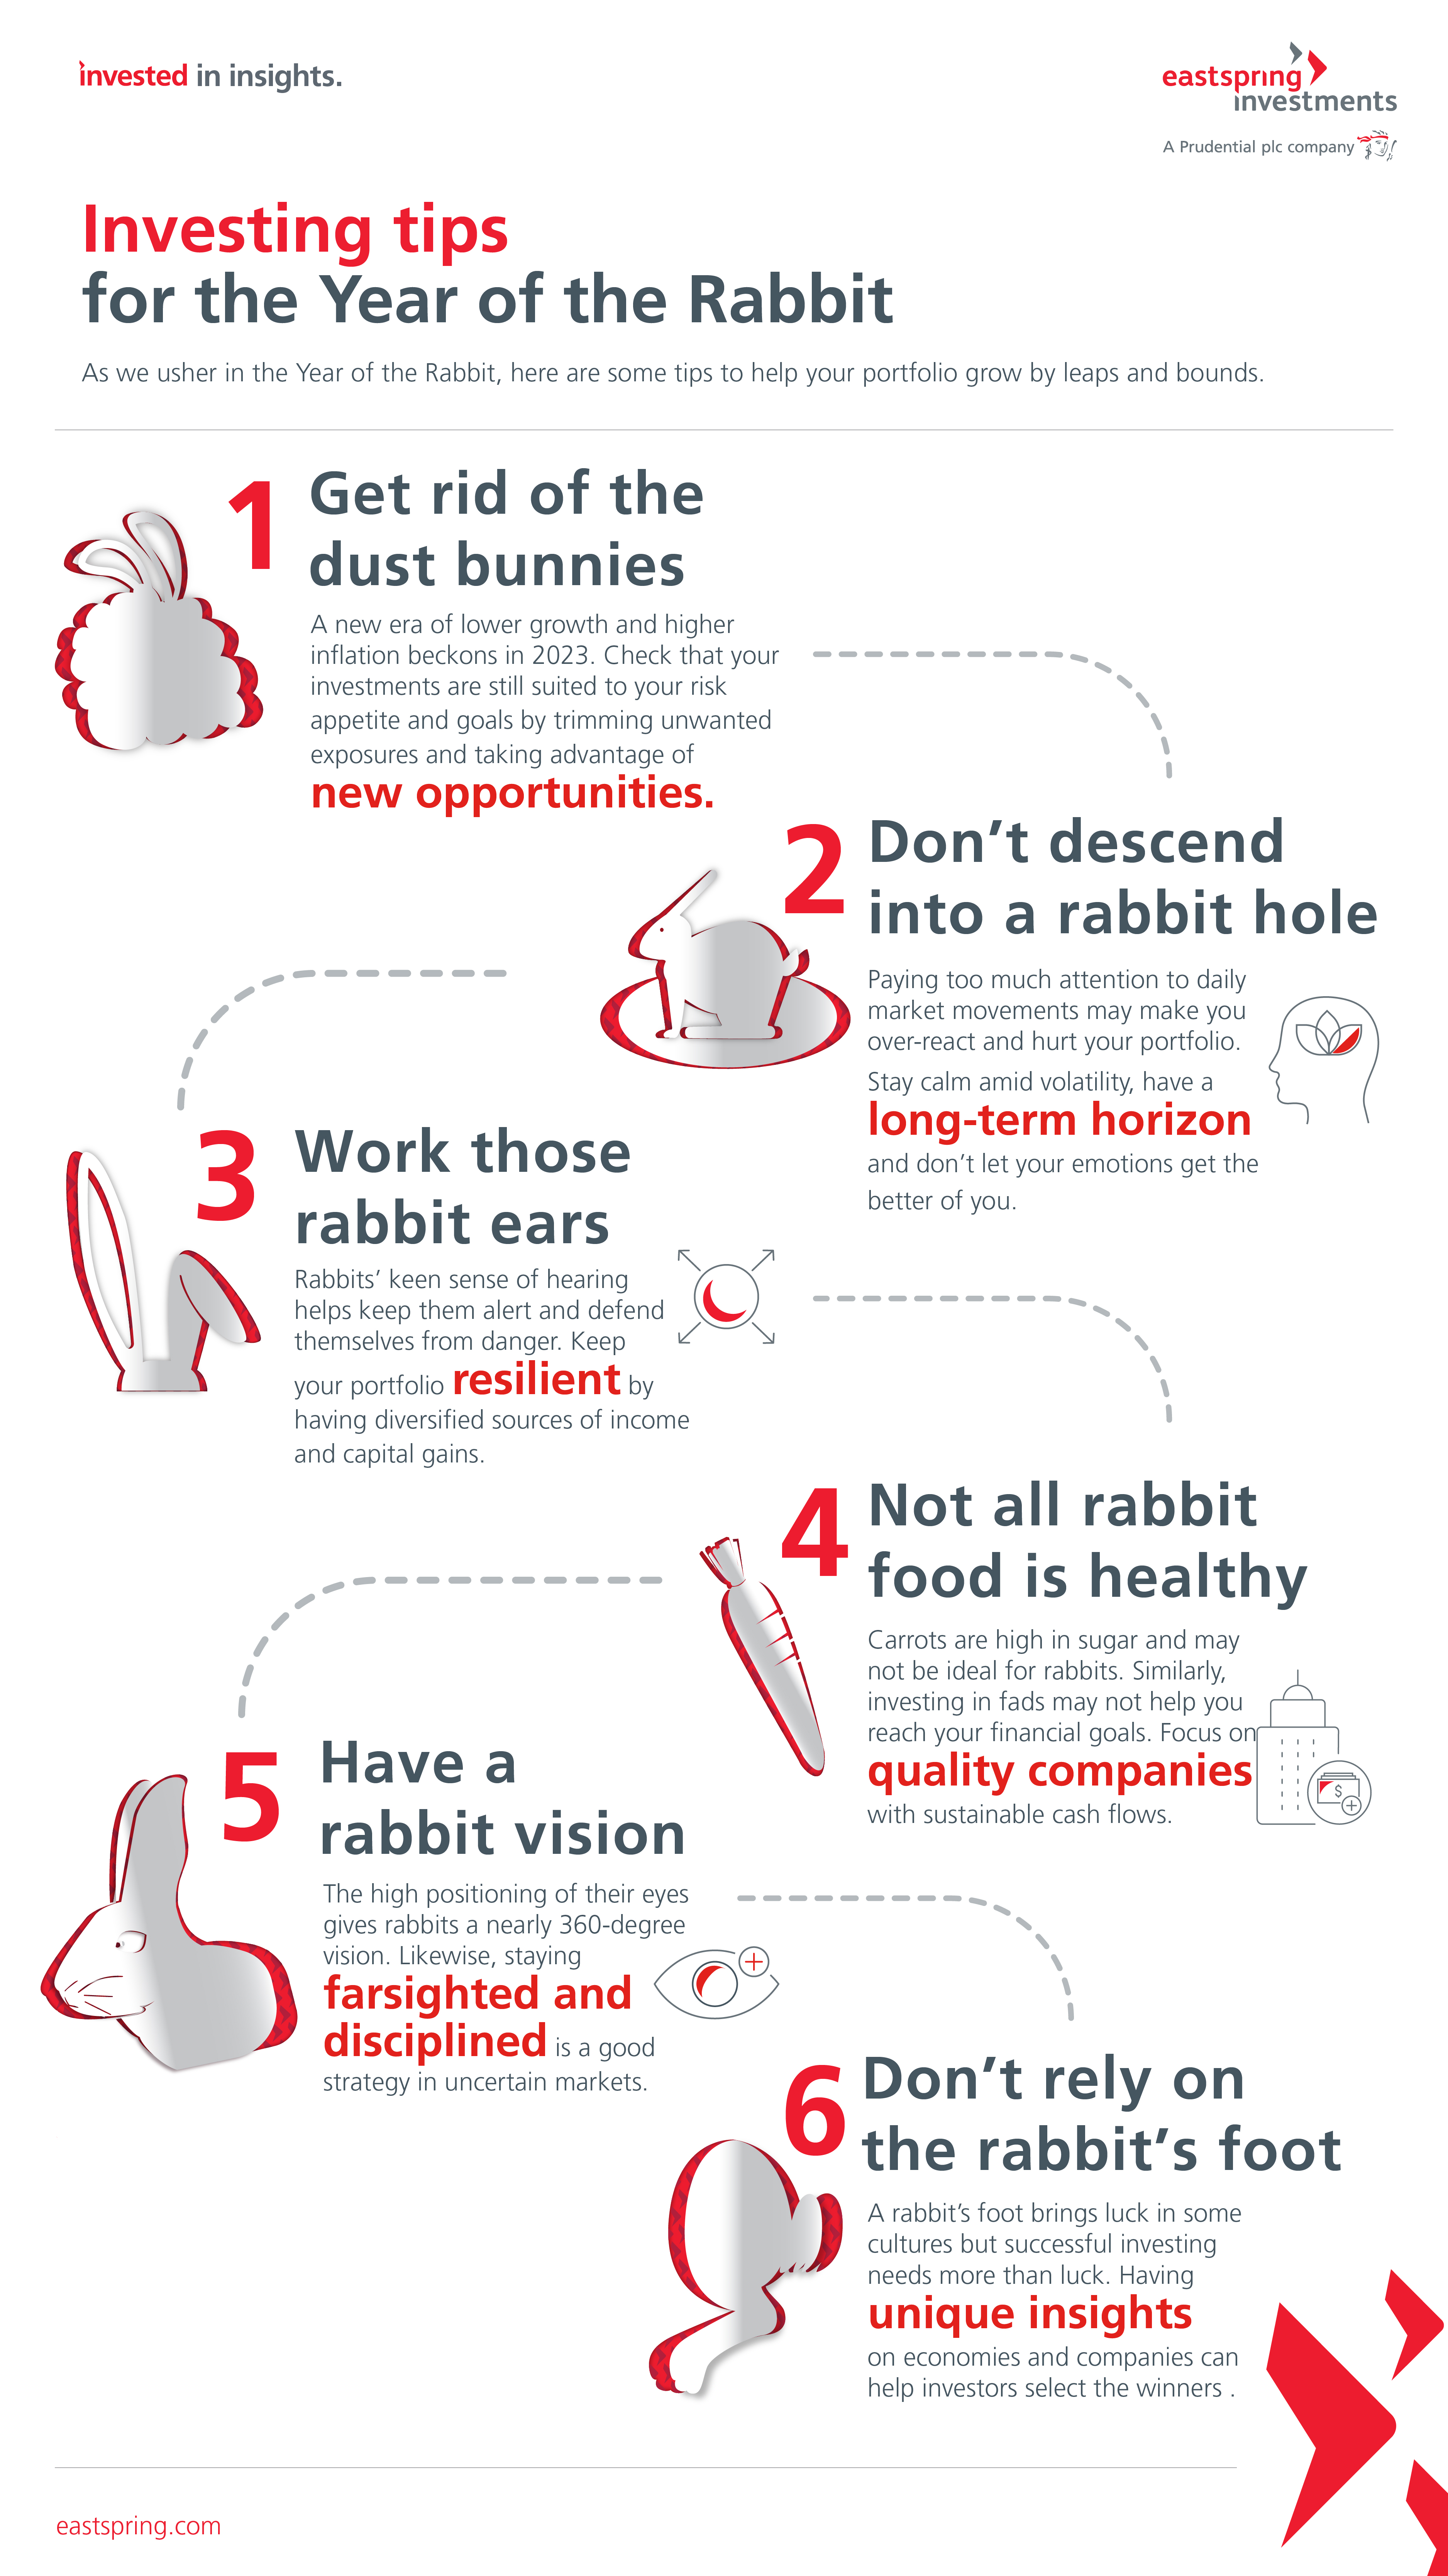 Investing tips for the year of the Rabbit  